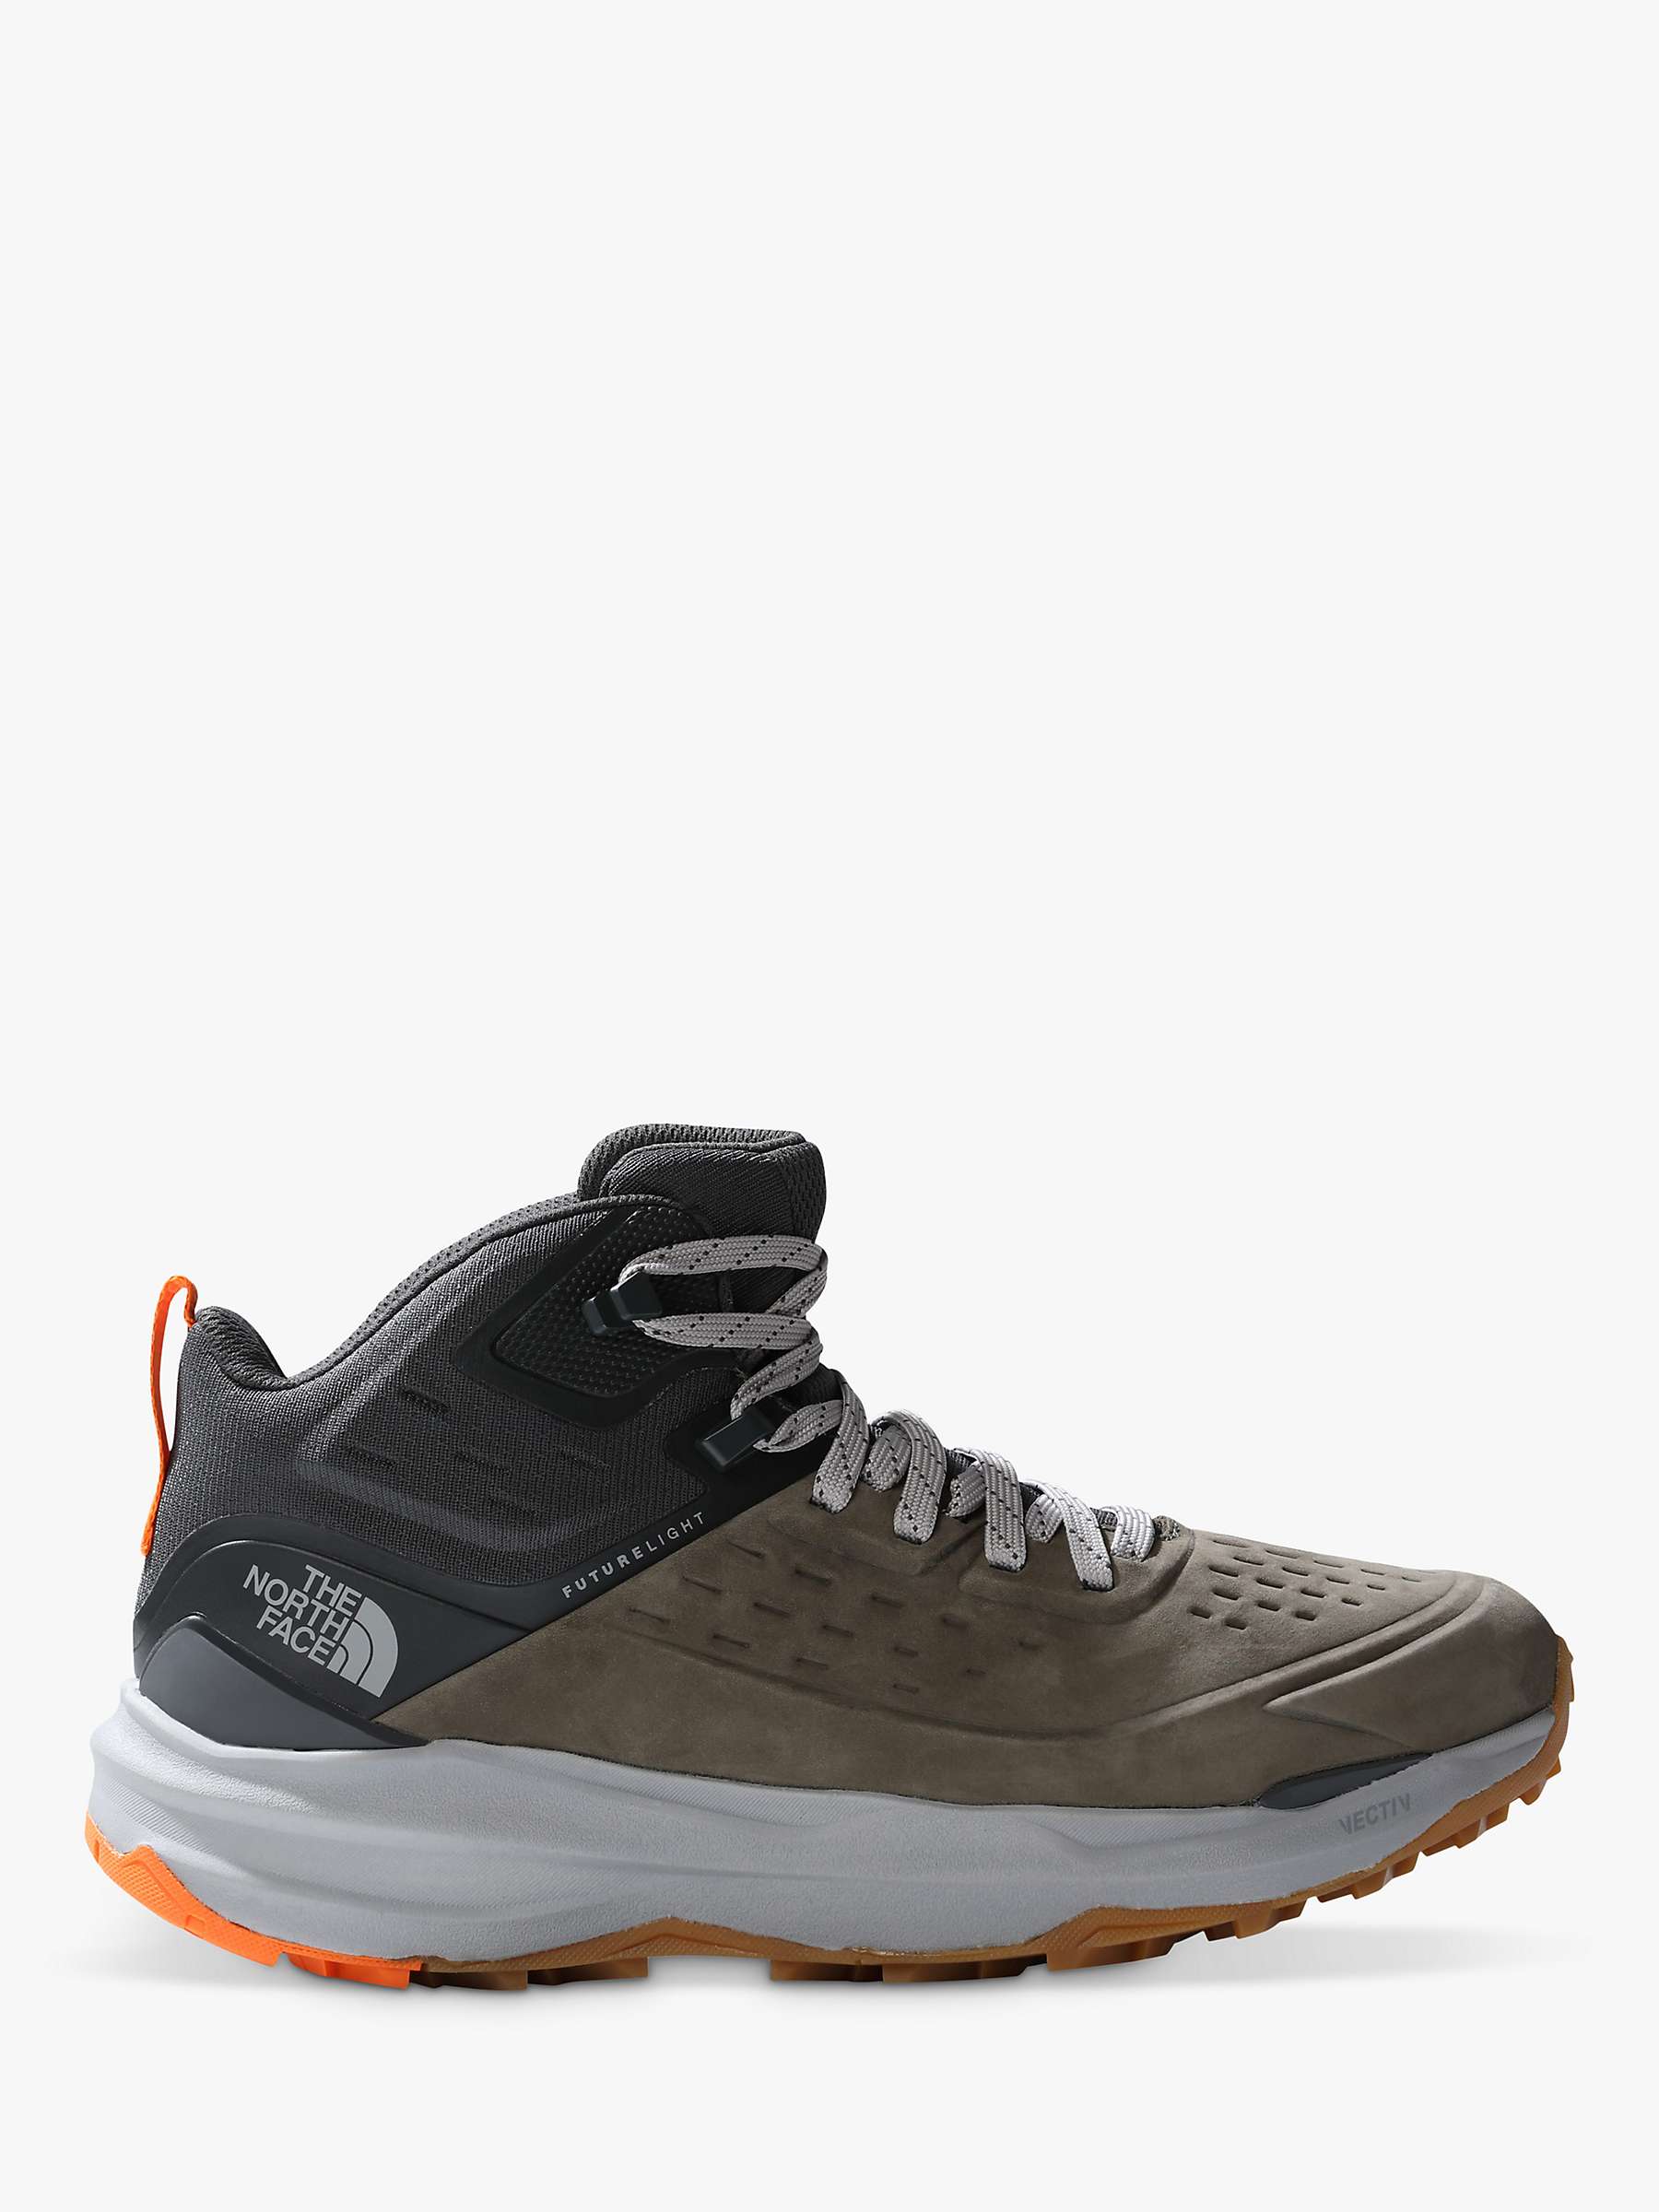 Buy The North Face VECTIV™ Exploris II Leather Men's Hiking Boots Online at johnlewis.com